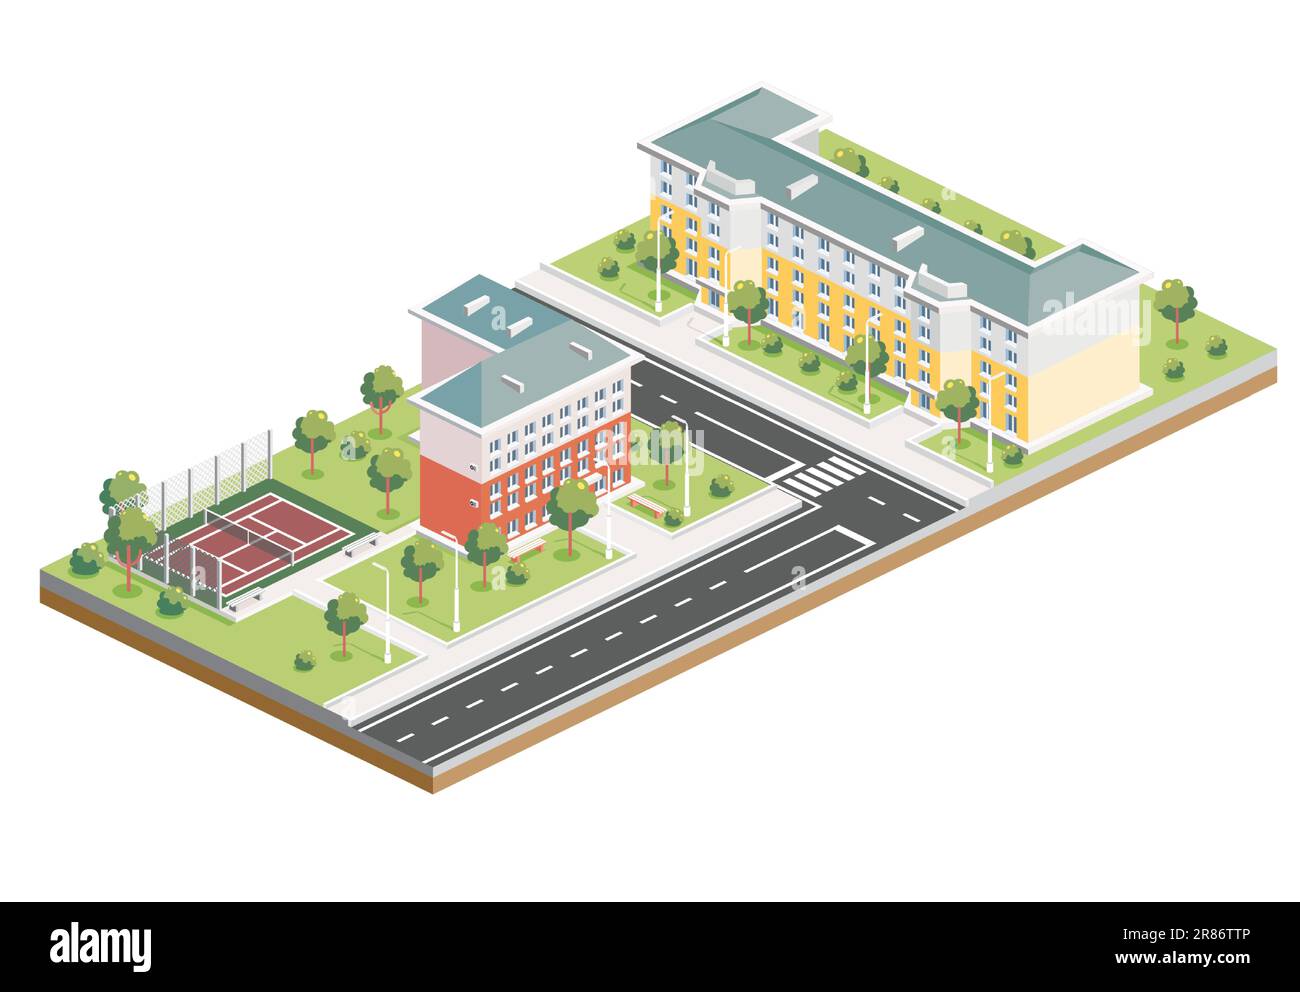 Isometric Residential District. Two Five Storey Buildings. Hotel with Tennis Court. Infographic Element. Vector Illustration. City Architecture. Stock Vector